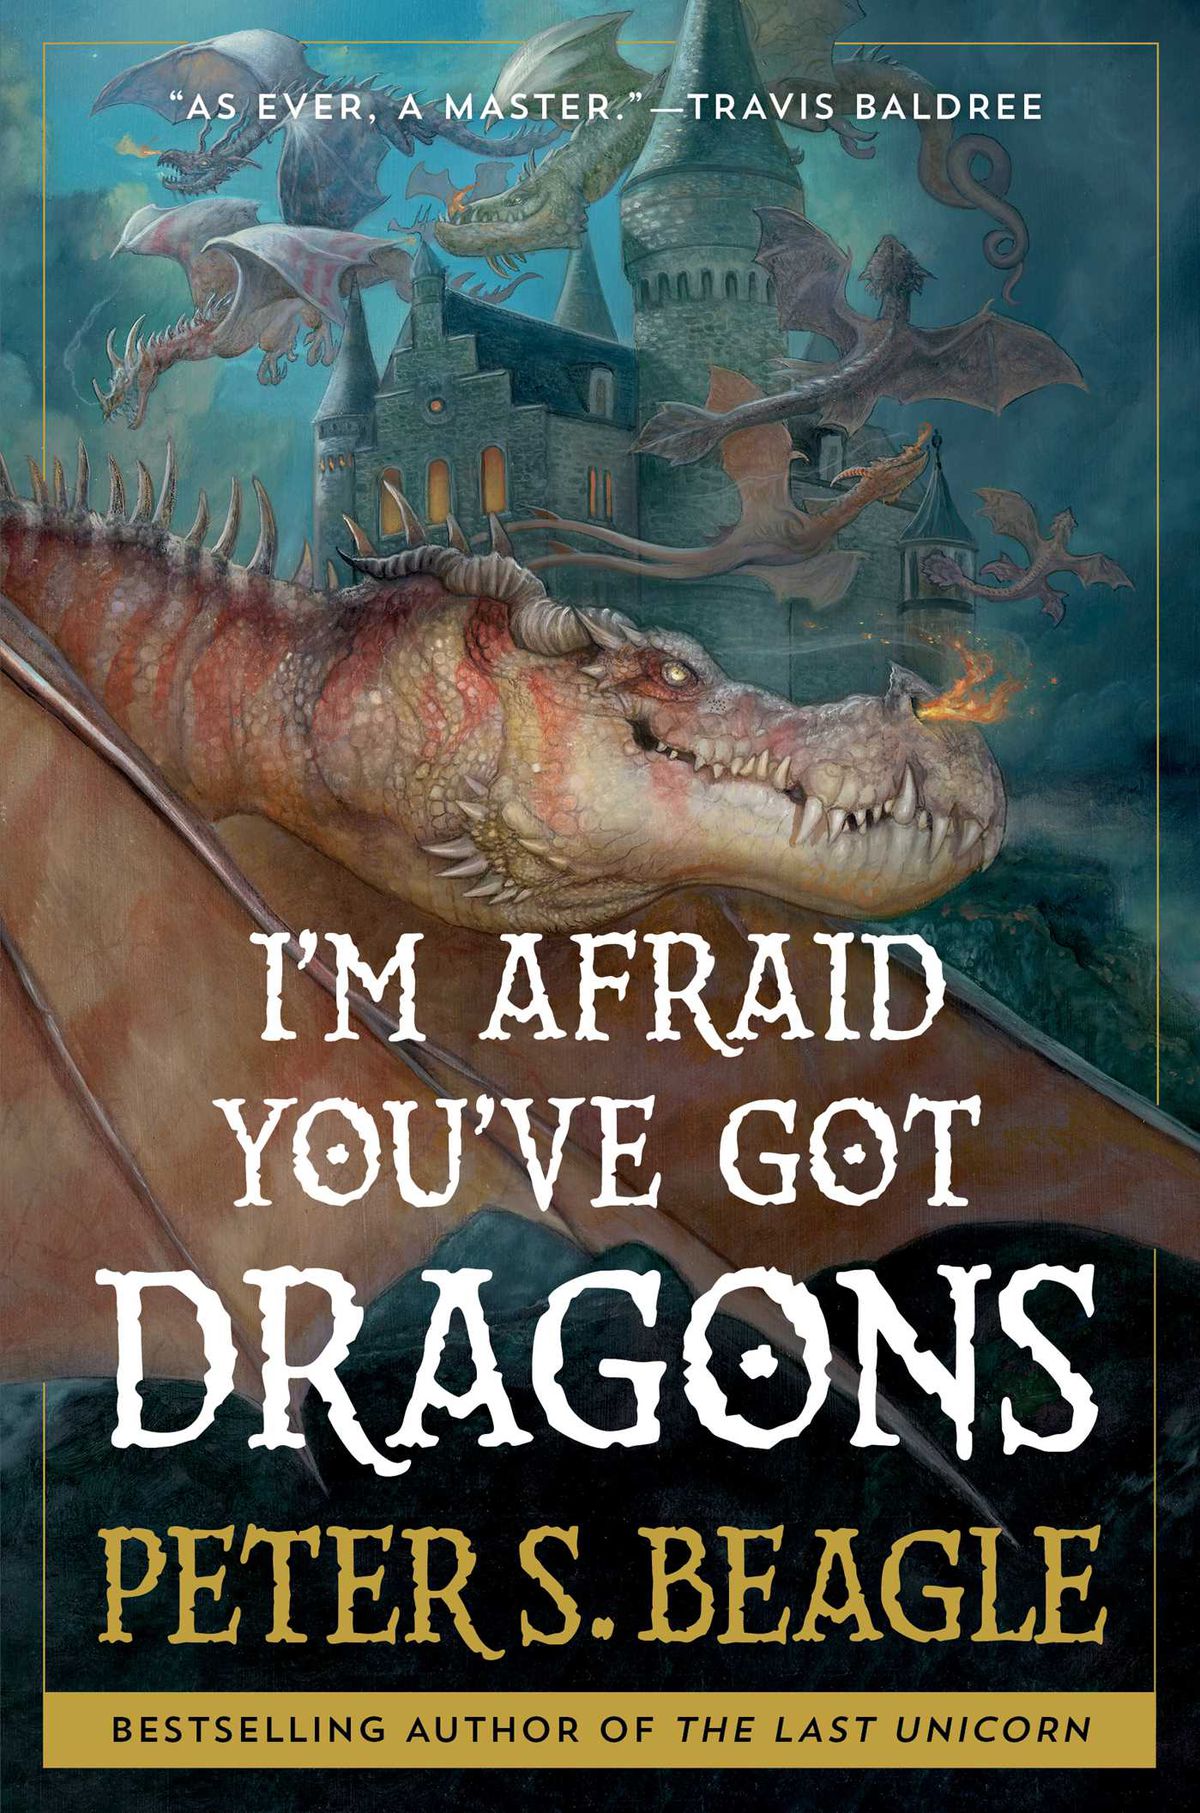 The U.S. cover of Peter Beagle’s fantasy novel I’m Afraid You’ve Got Dragons, featuring a large, toothy red-striped dragon with a wisp of flame coming out of its nostrils, against a blue background featuring many more dragons circling a towering castle